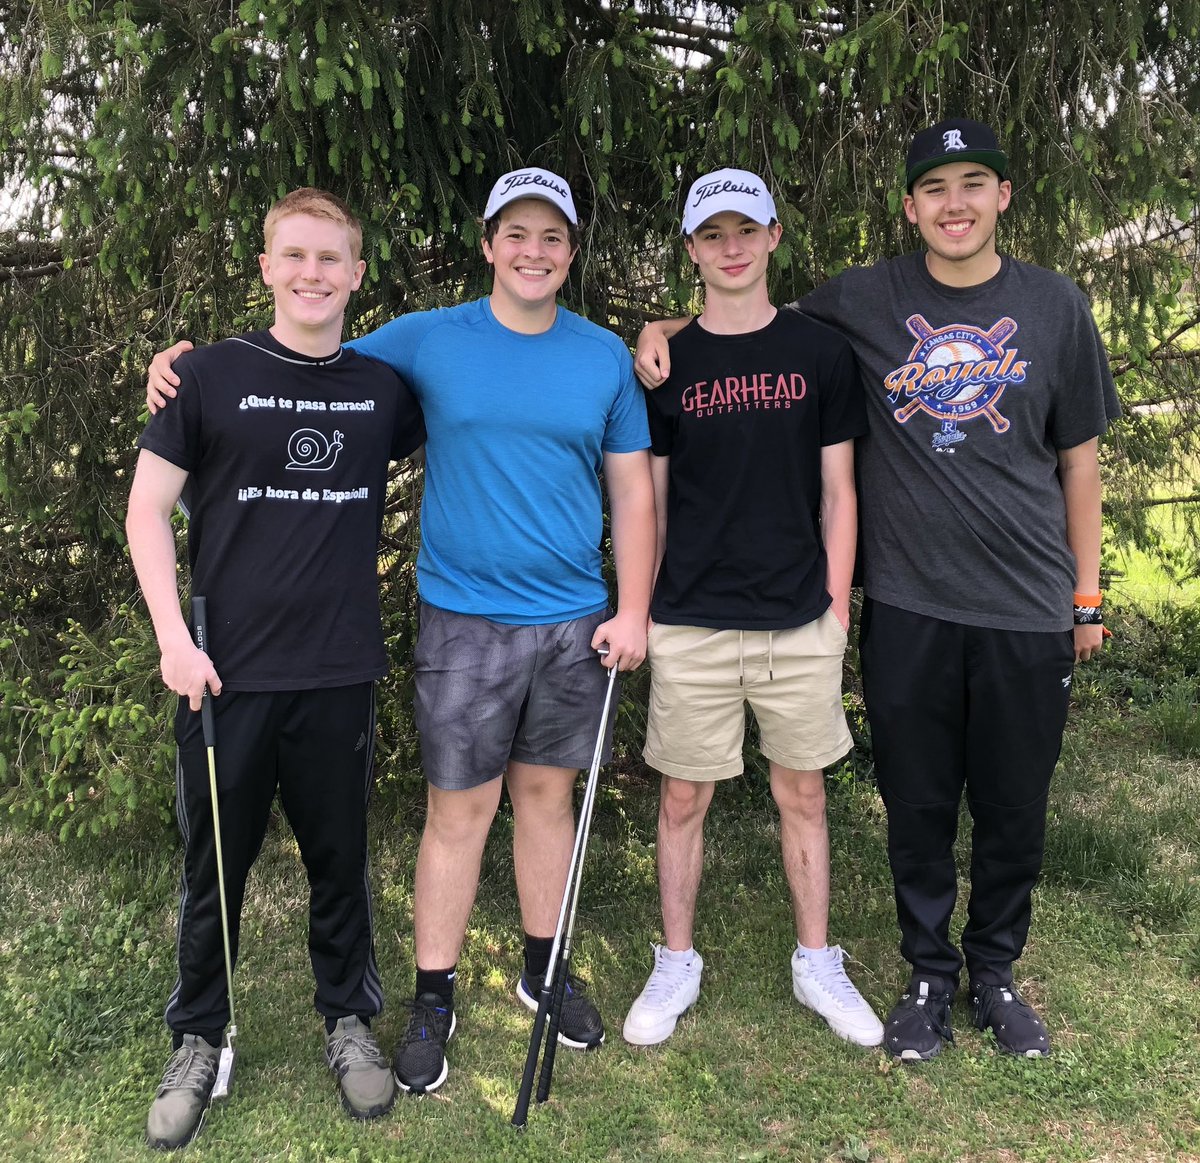 These Chiefs are all smiles after winning a match against their coach.😩 The coach was ready to make a comeback when Parker hits it 15’ from the hole. Luke then hits the flagstick & ends up 8’ from hole. Finally, Nick almost gets a hole in 1 & taps in for birdie. Way 2 go Chiefs!